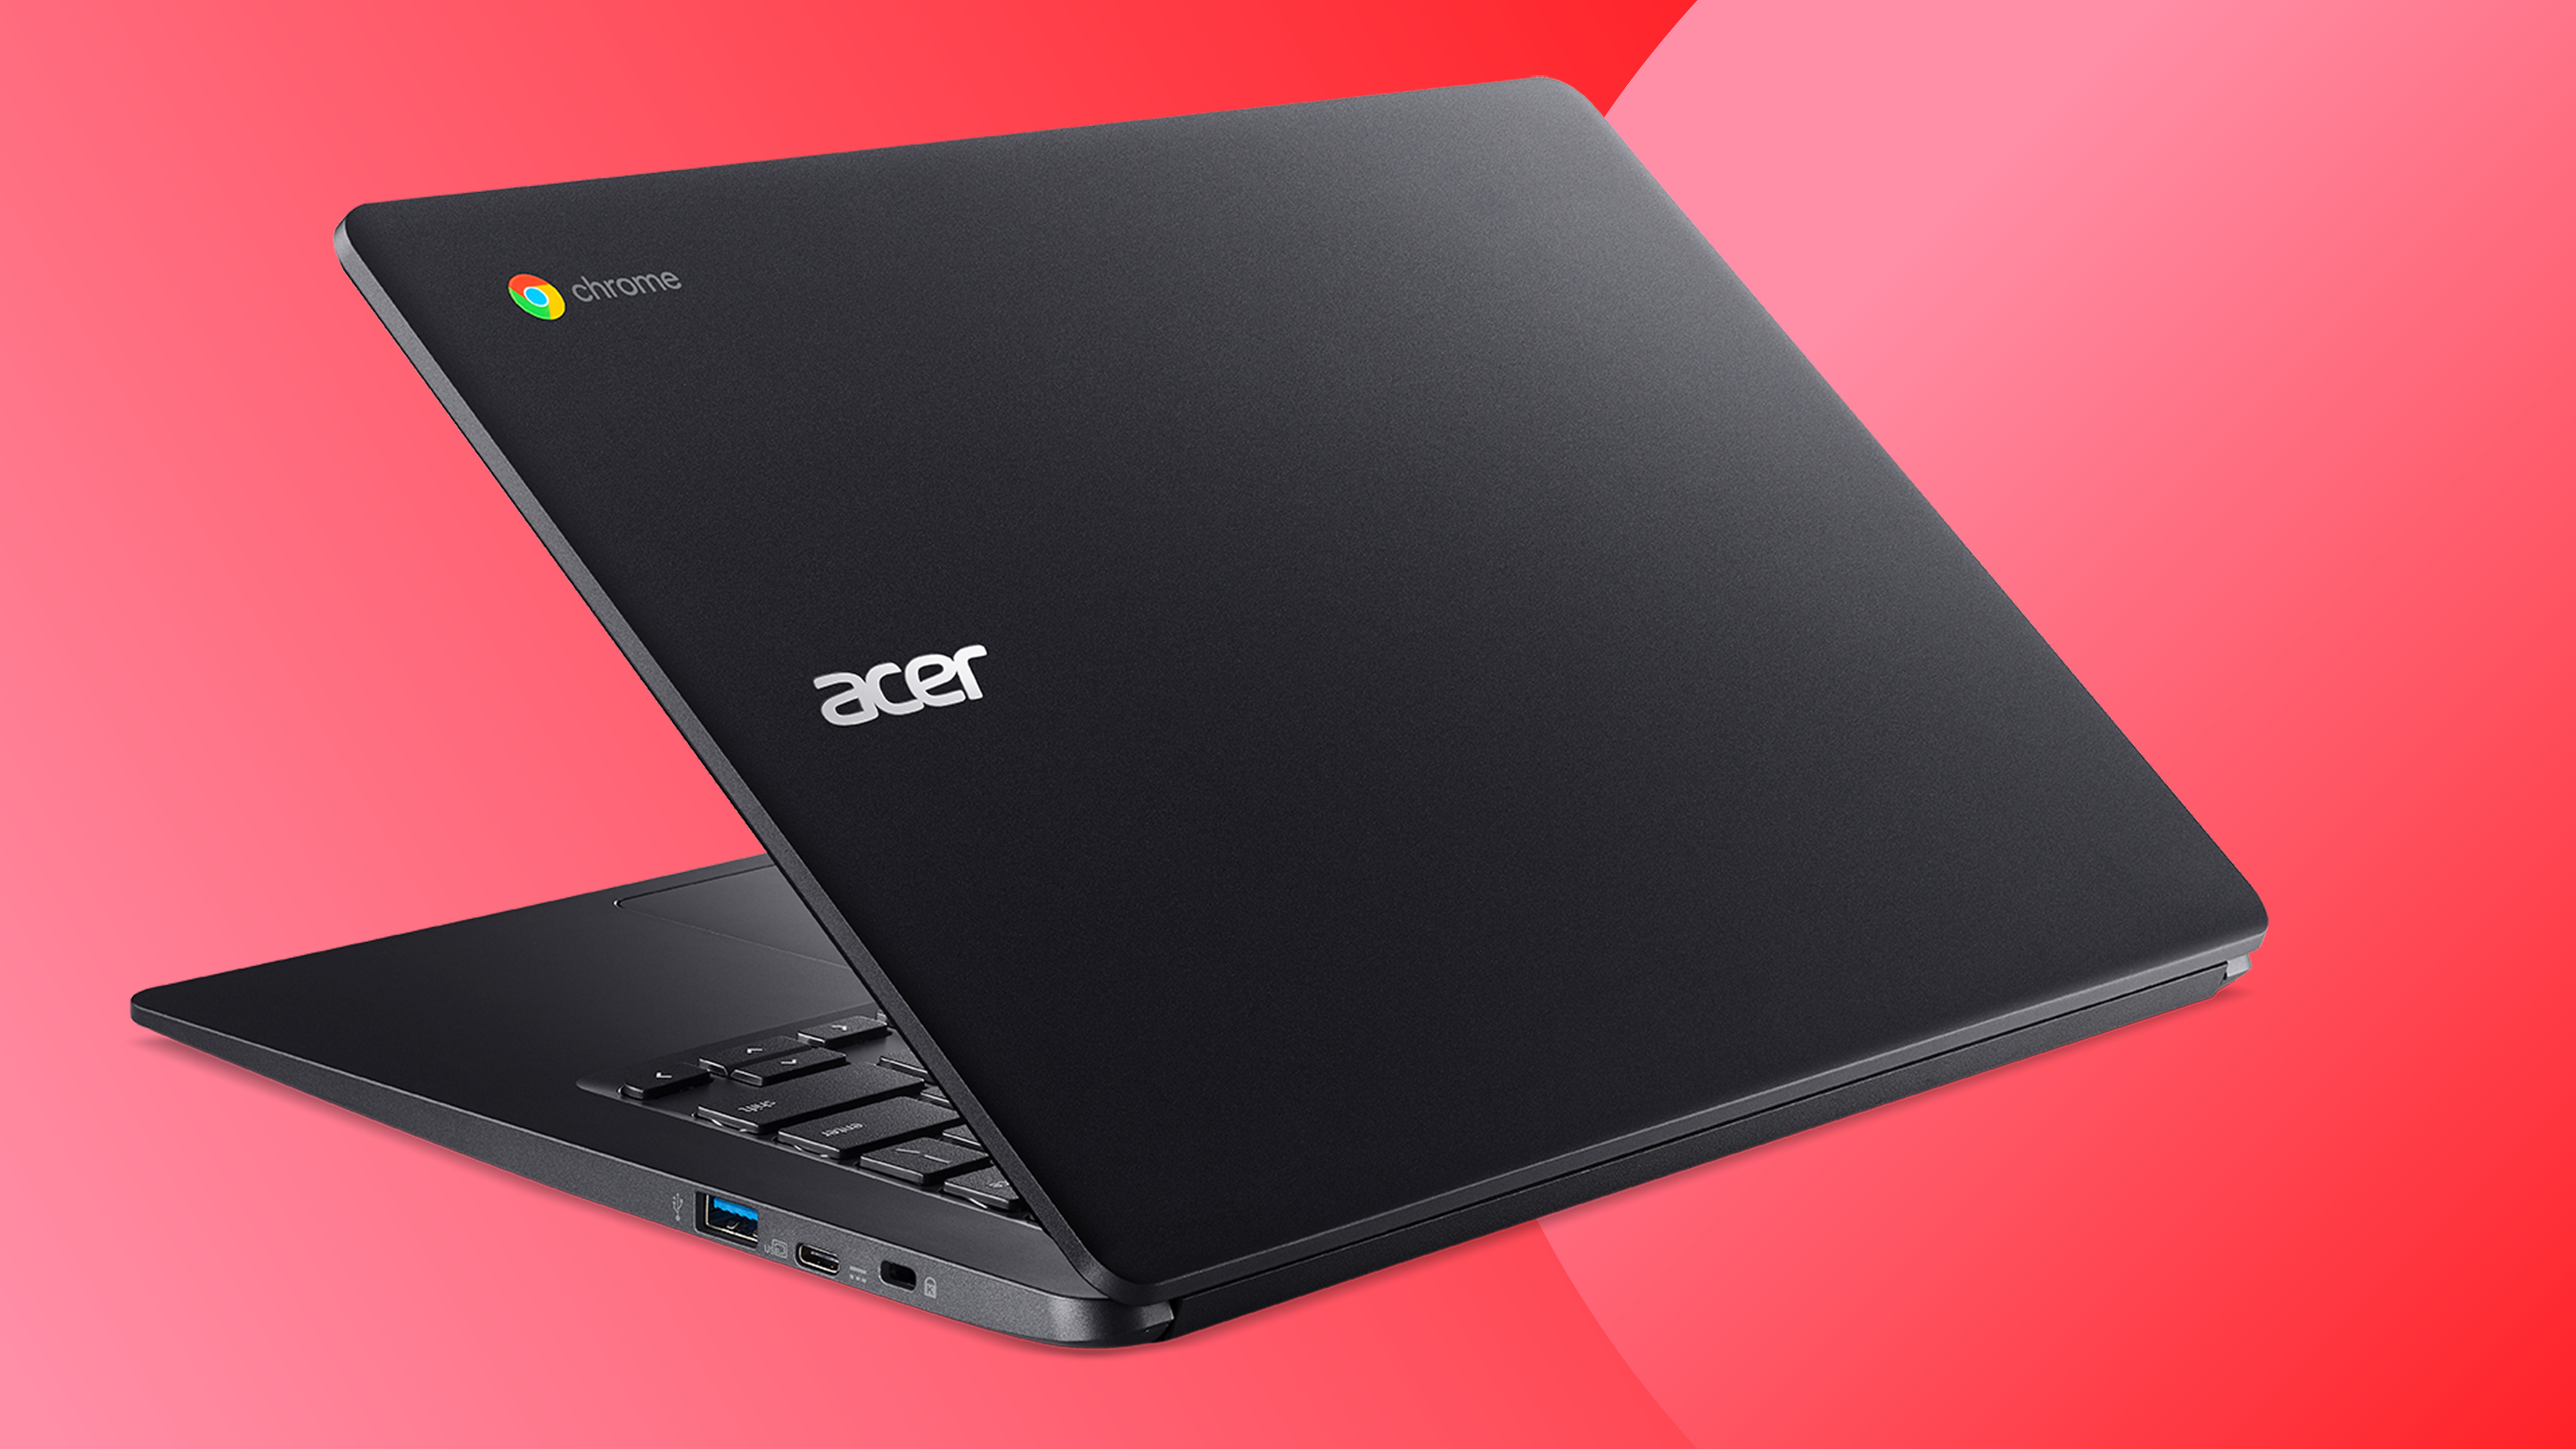 An Acer Black Friday deals image with an Acer Chromebook 314 on a red background